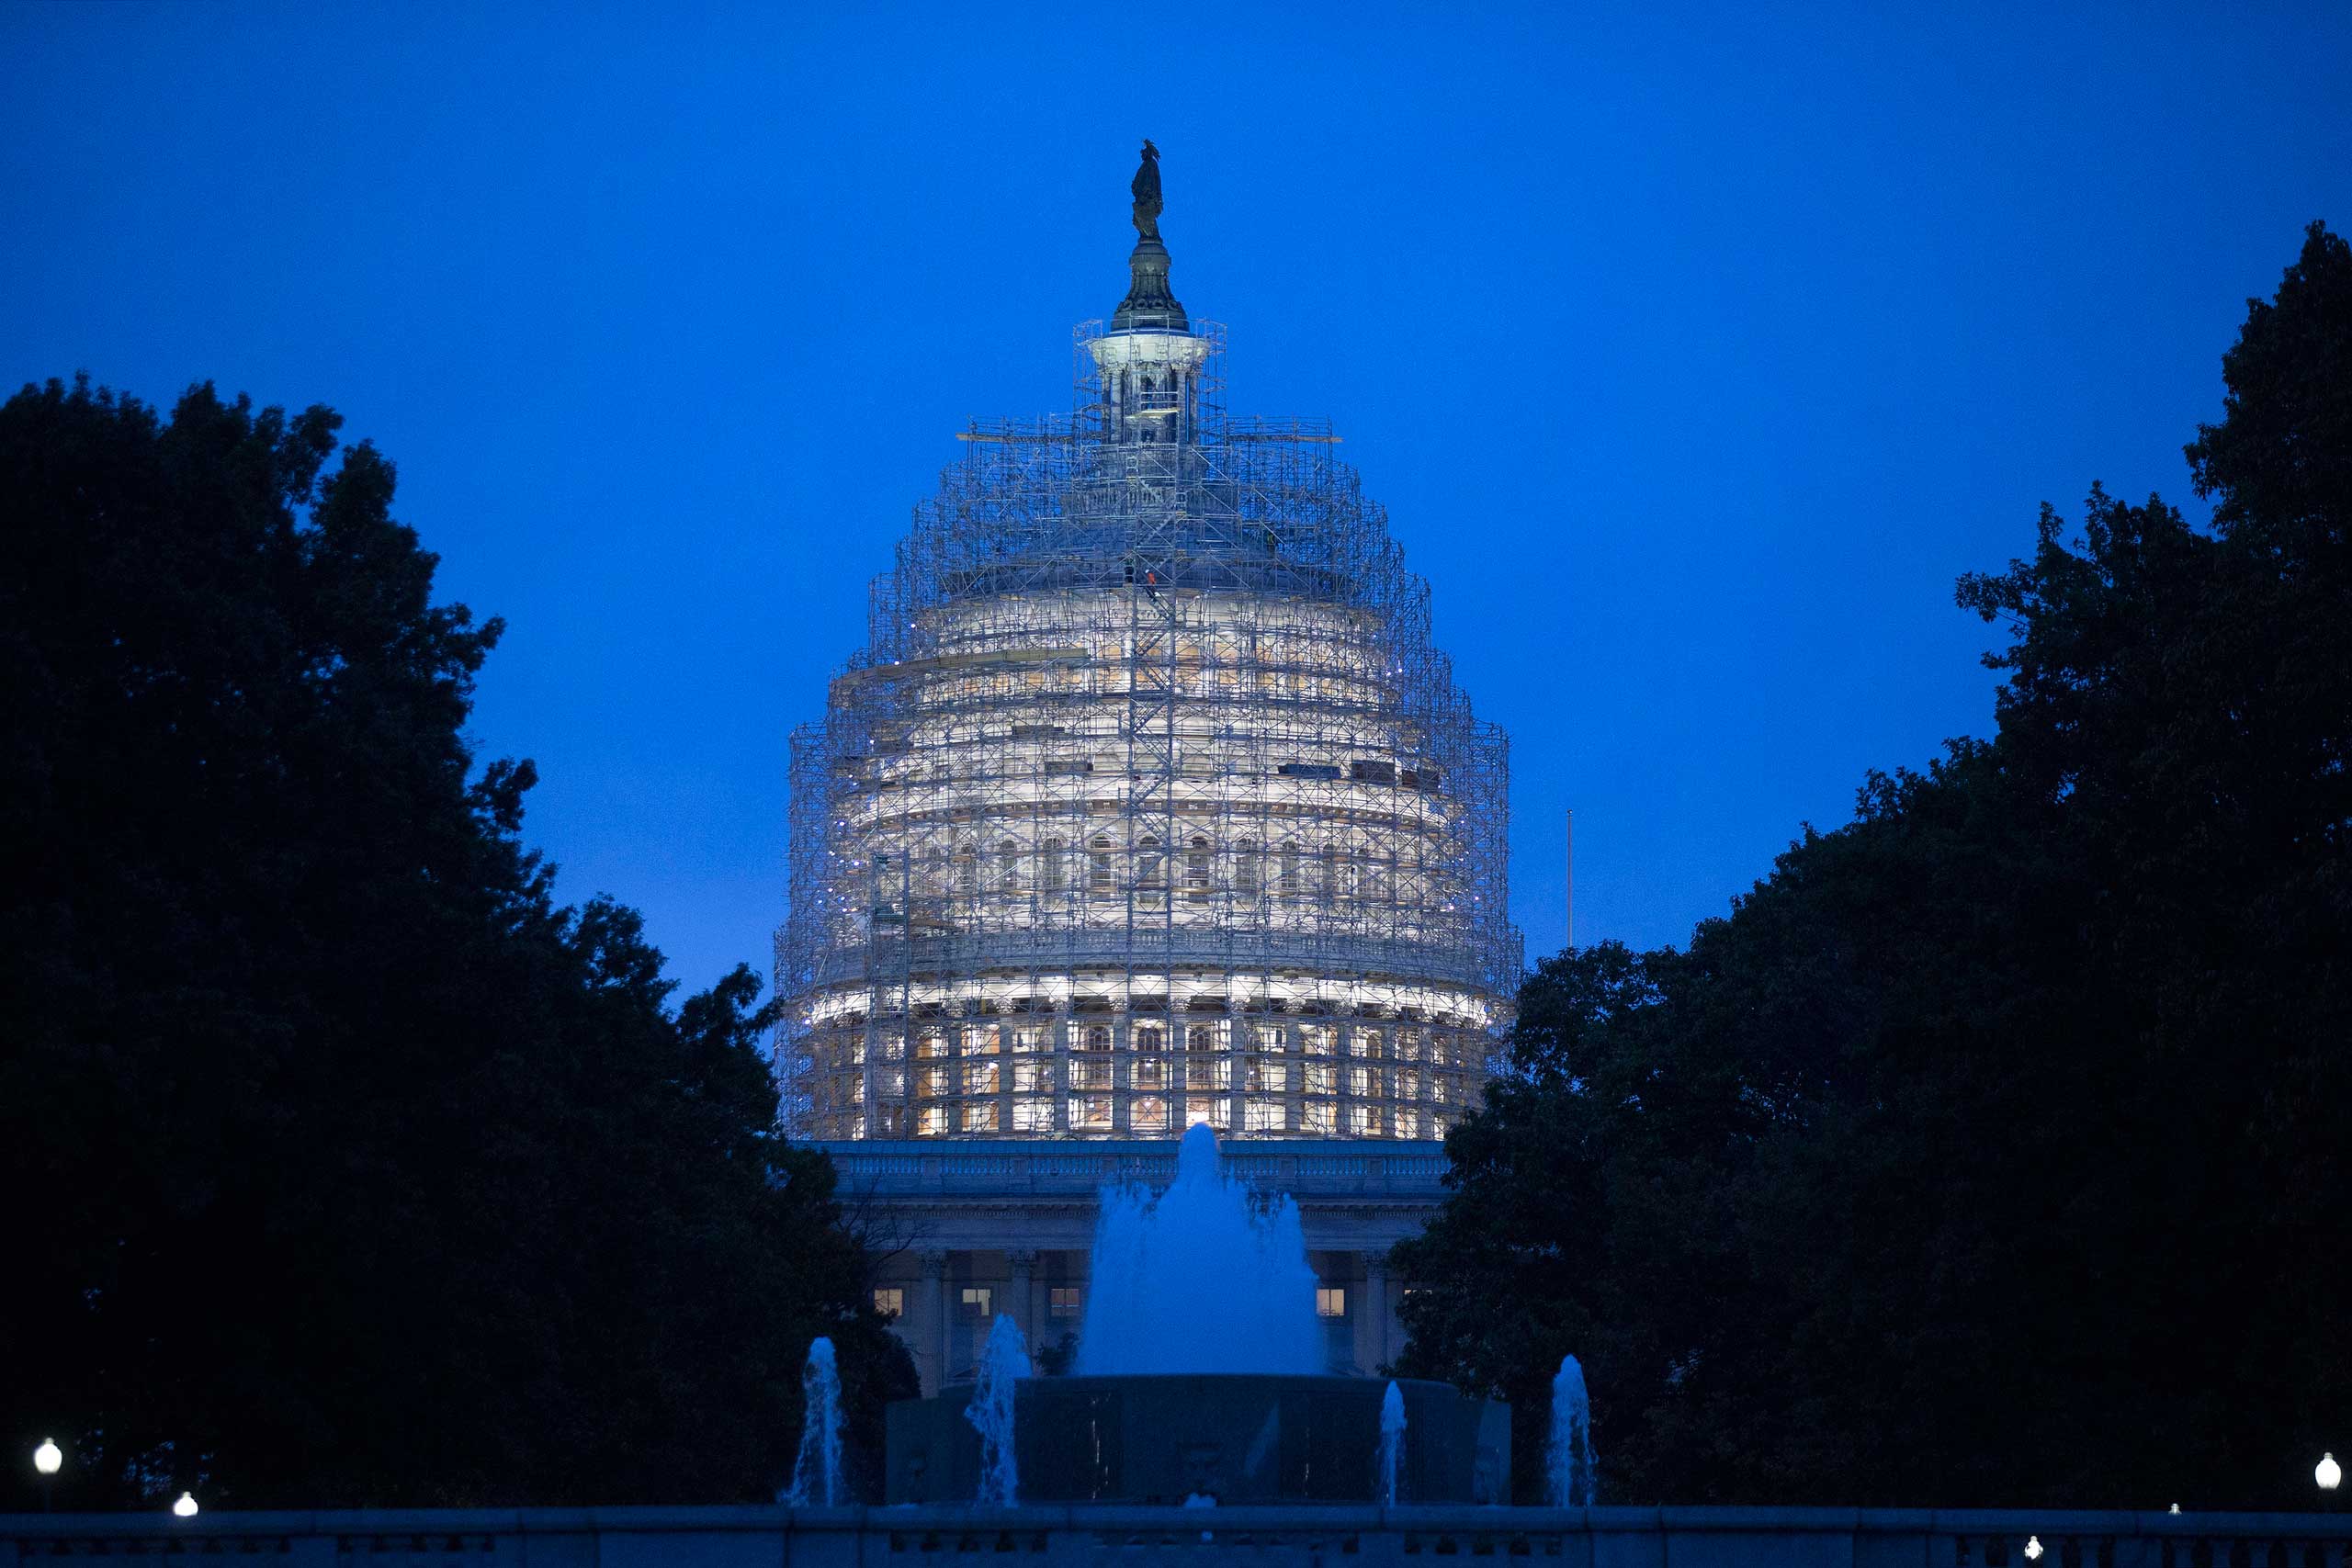 Nov. 5, 2014. Scaffolding surrounds the U.S. Capitol building while it undergoes repairs in Washington, D.C. Republicans roared back in the midterm elections on Tuesday, capturing control of the Senate from Democrats, winning crucial governor races and solidifying their majority in the U.S. House of Representatives. (Andrew Harrer—Bloomberg via Getty Images)